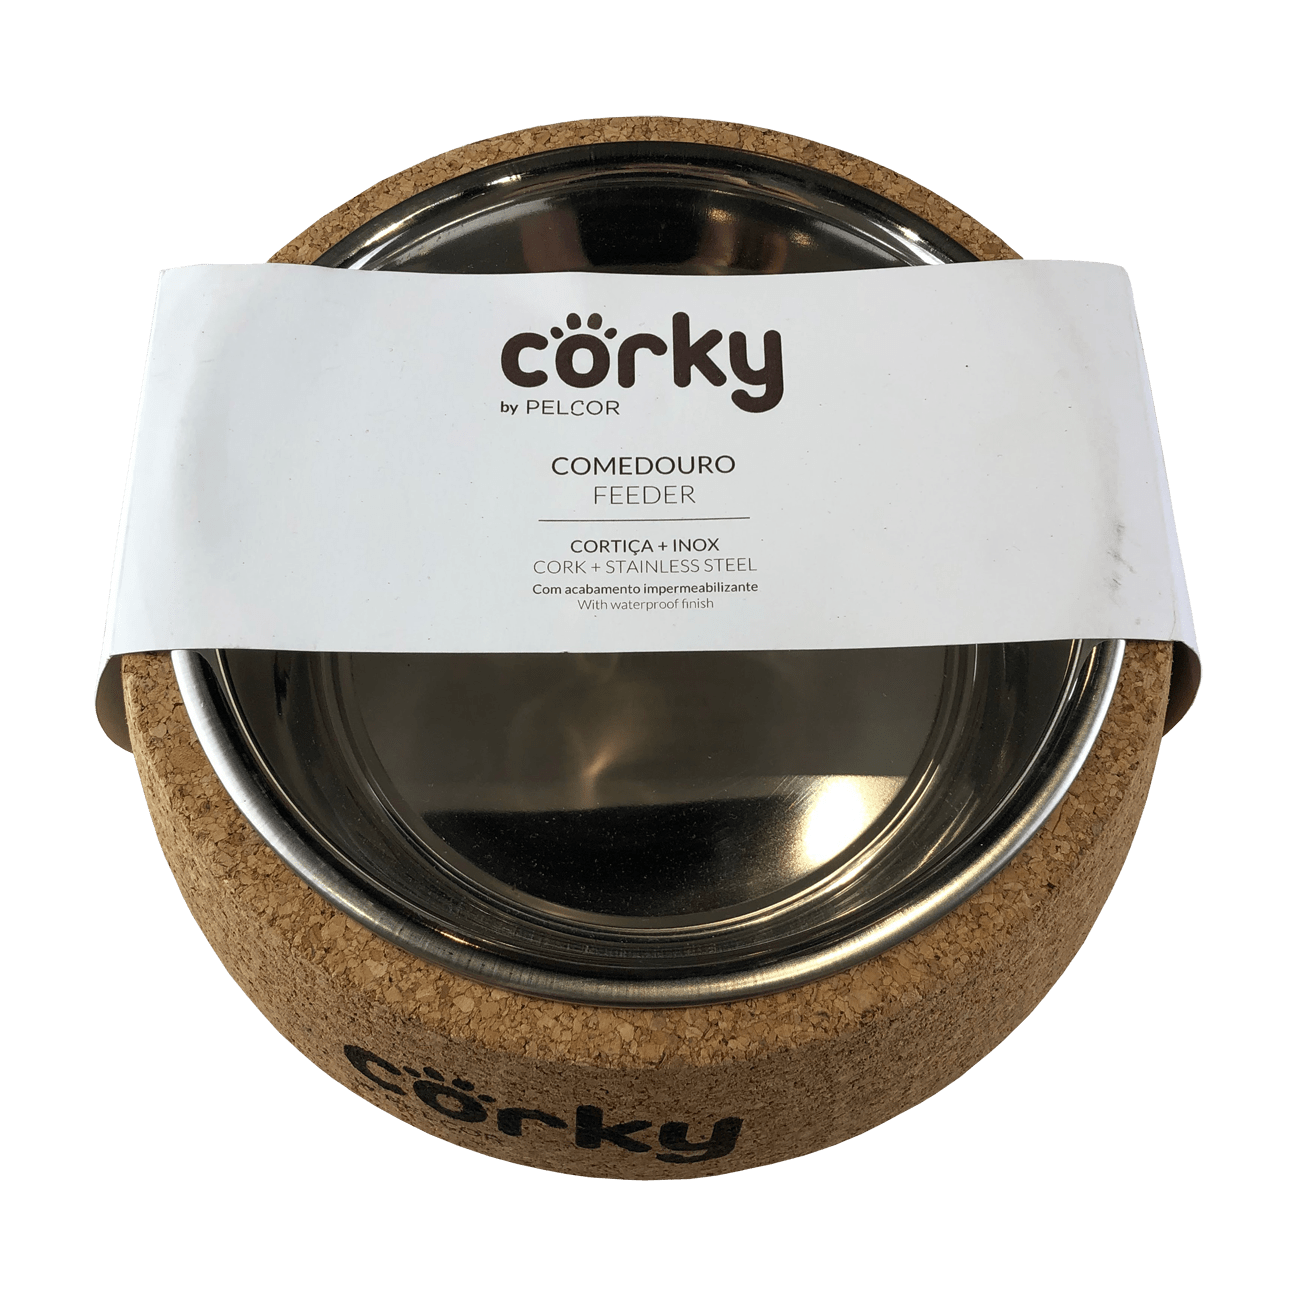 A stainless steel dog bowl in a natural cork holder with "corky" written in black on the front of the cork. The bowl is in a paper sleeve which says "corky by pelcor cork and stainless steel feeder"